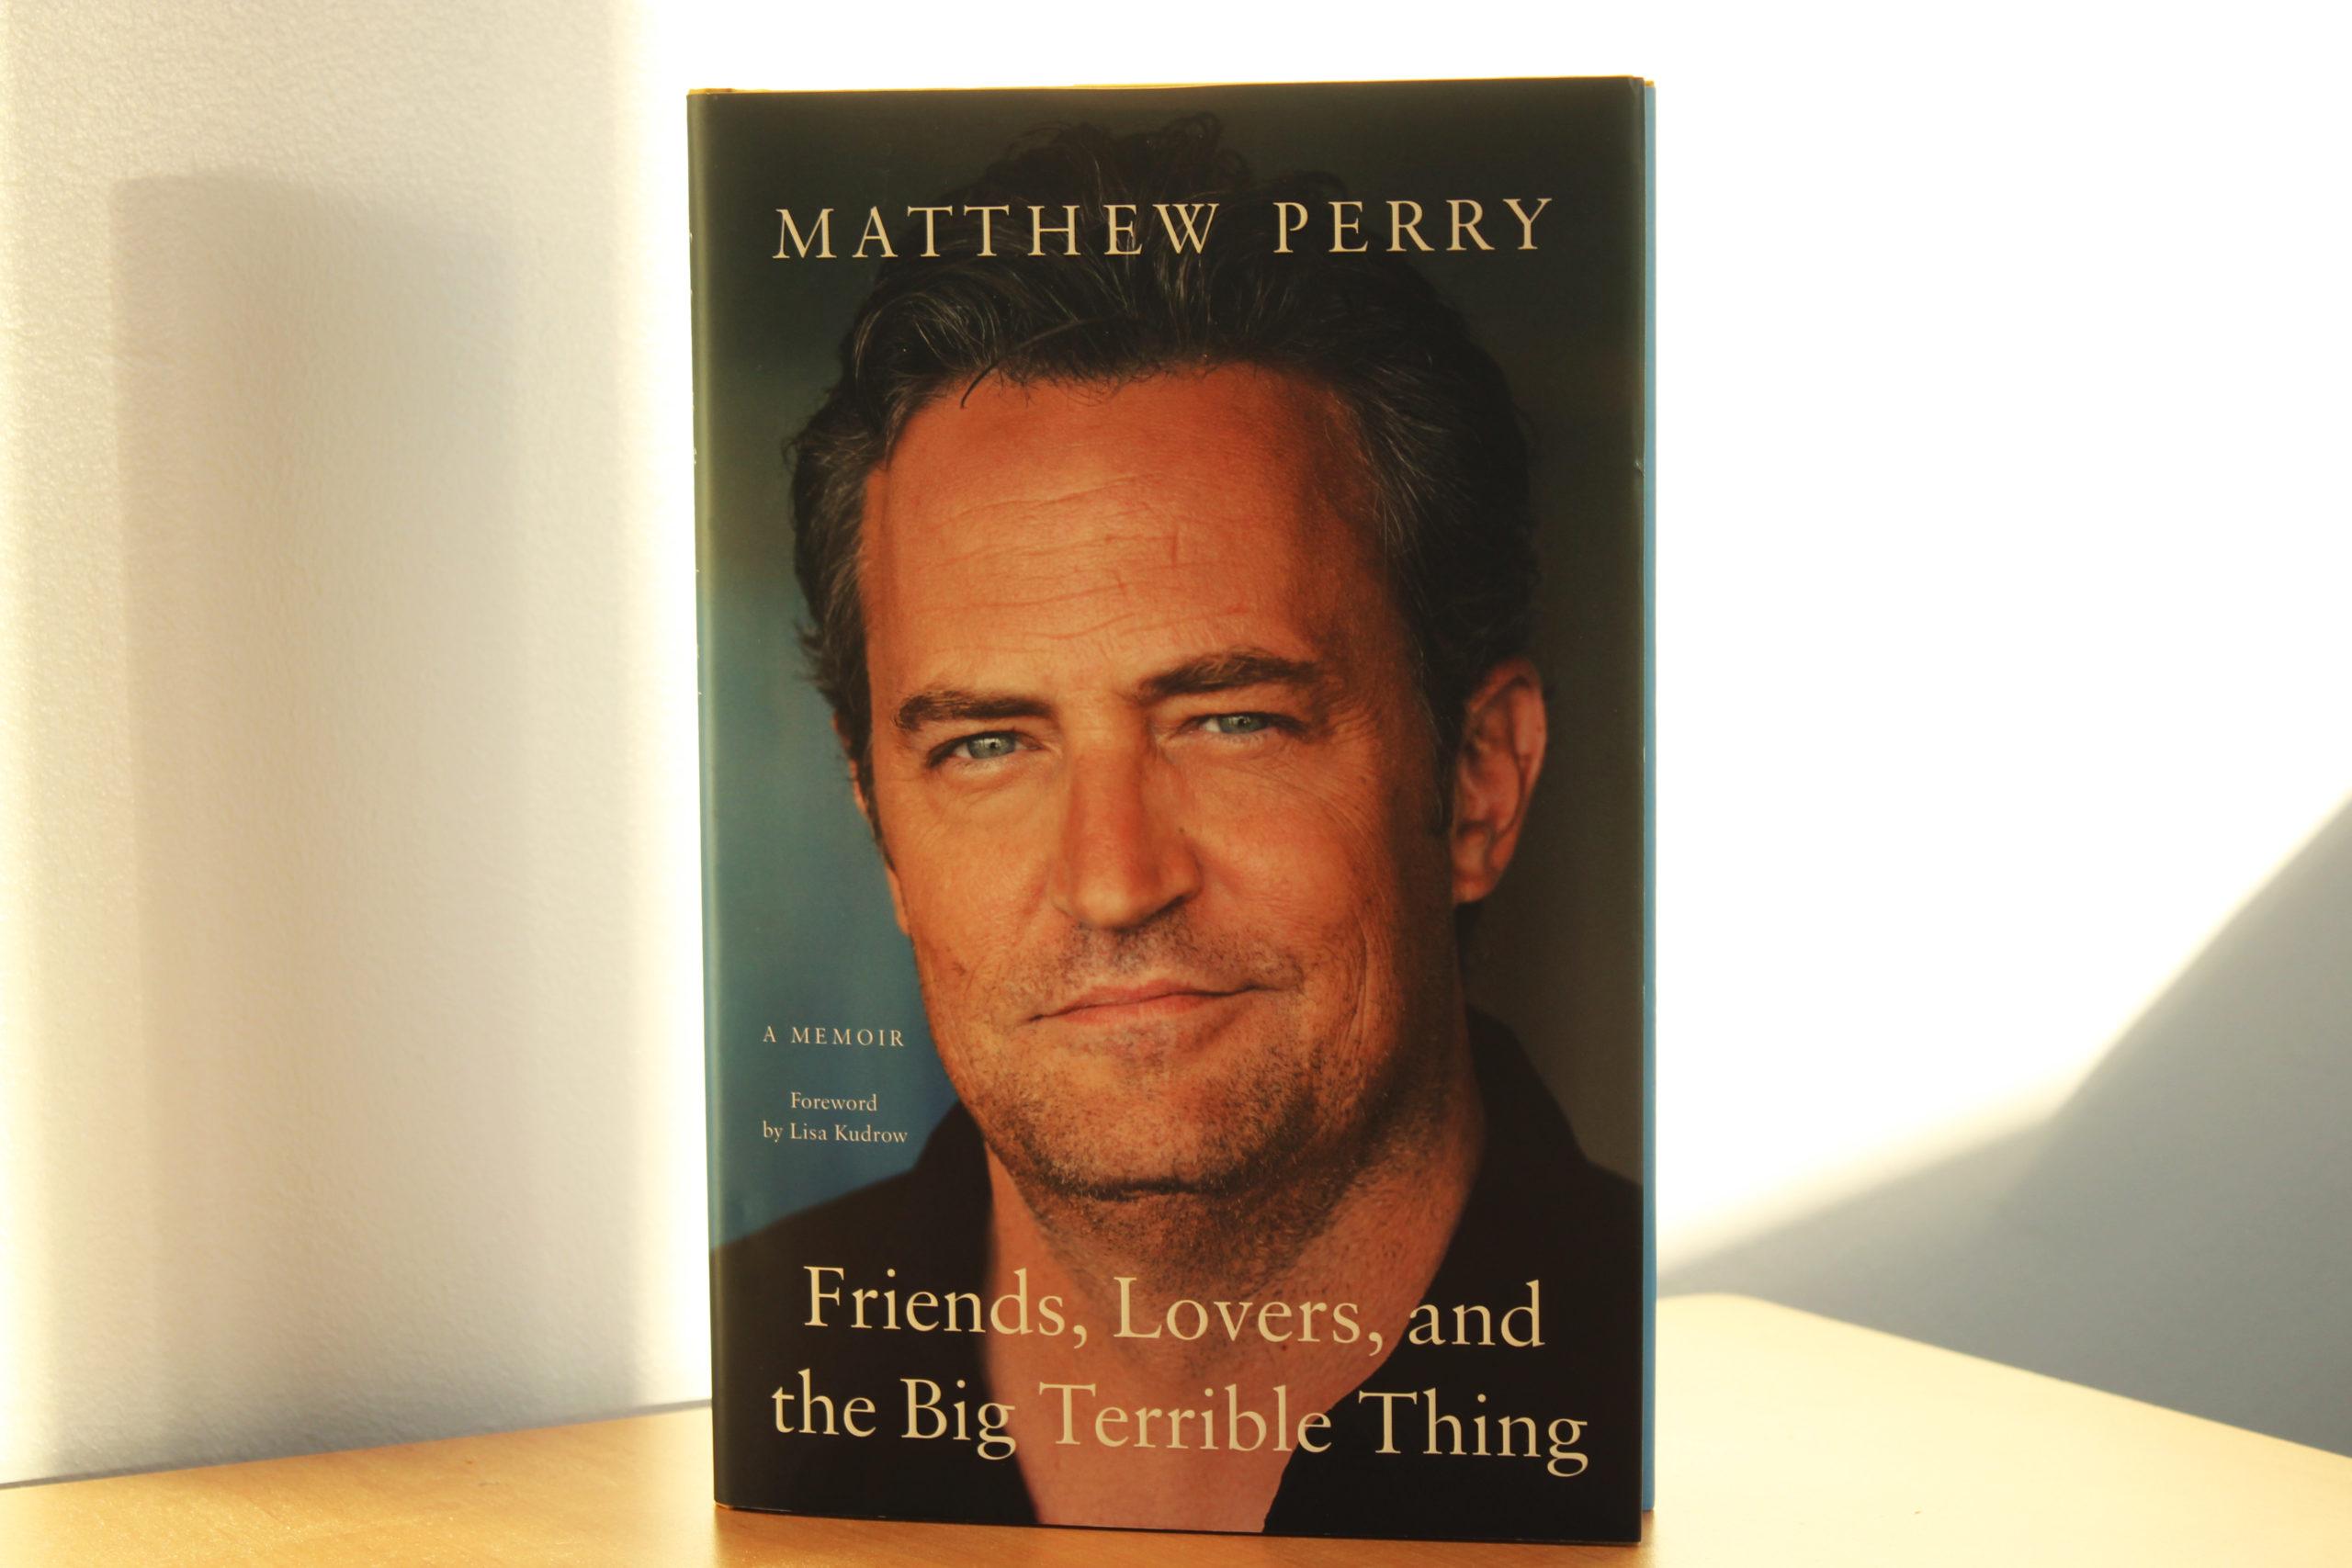 Workbook for Friends, Lovers and the Big Terrible Thing by Matthew